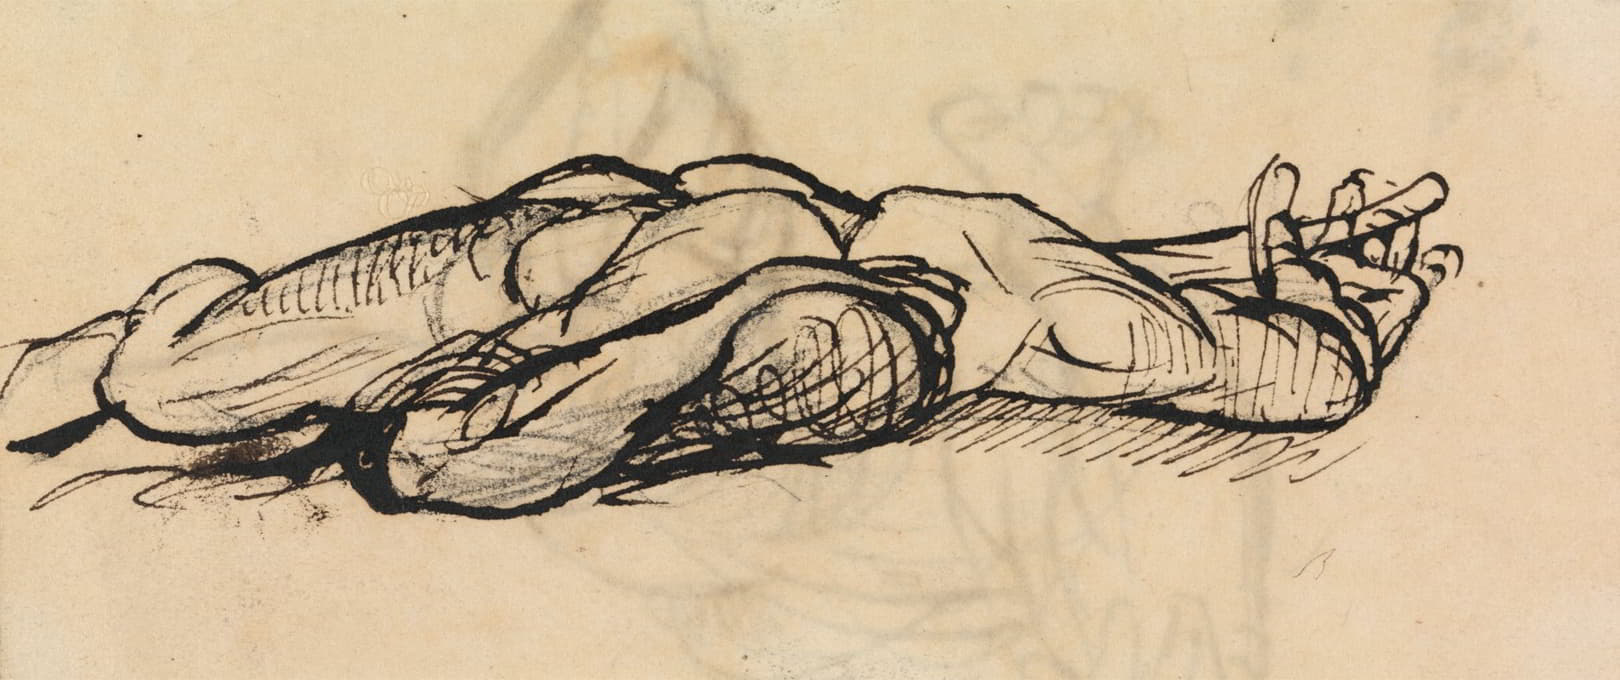 Benjamin Robert Haydon - Study of a Male Nude, in a Laid out Position on the Floor